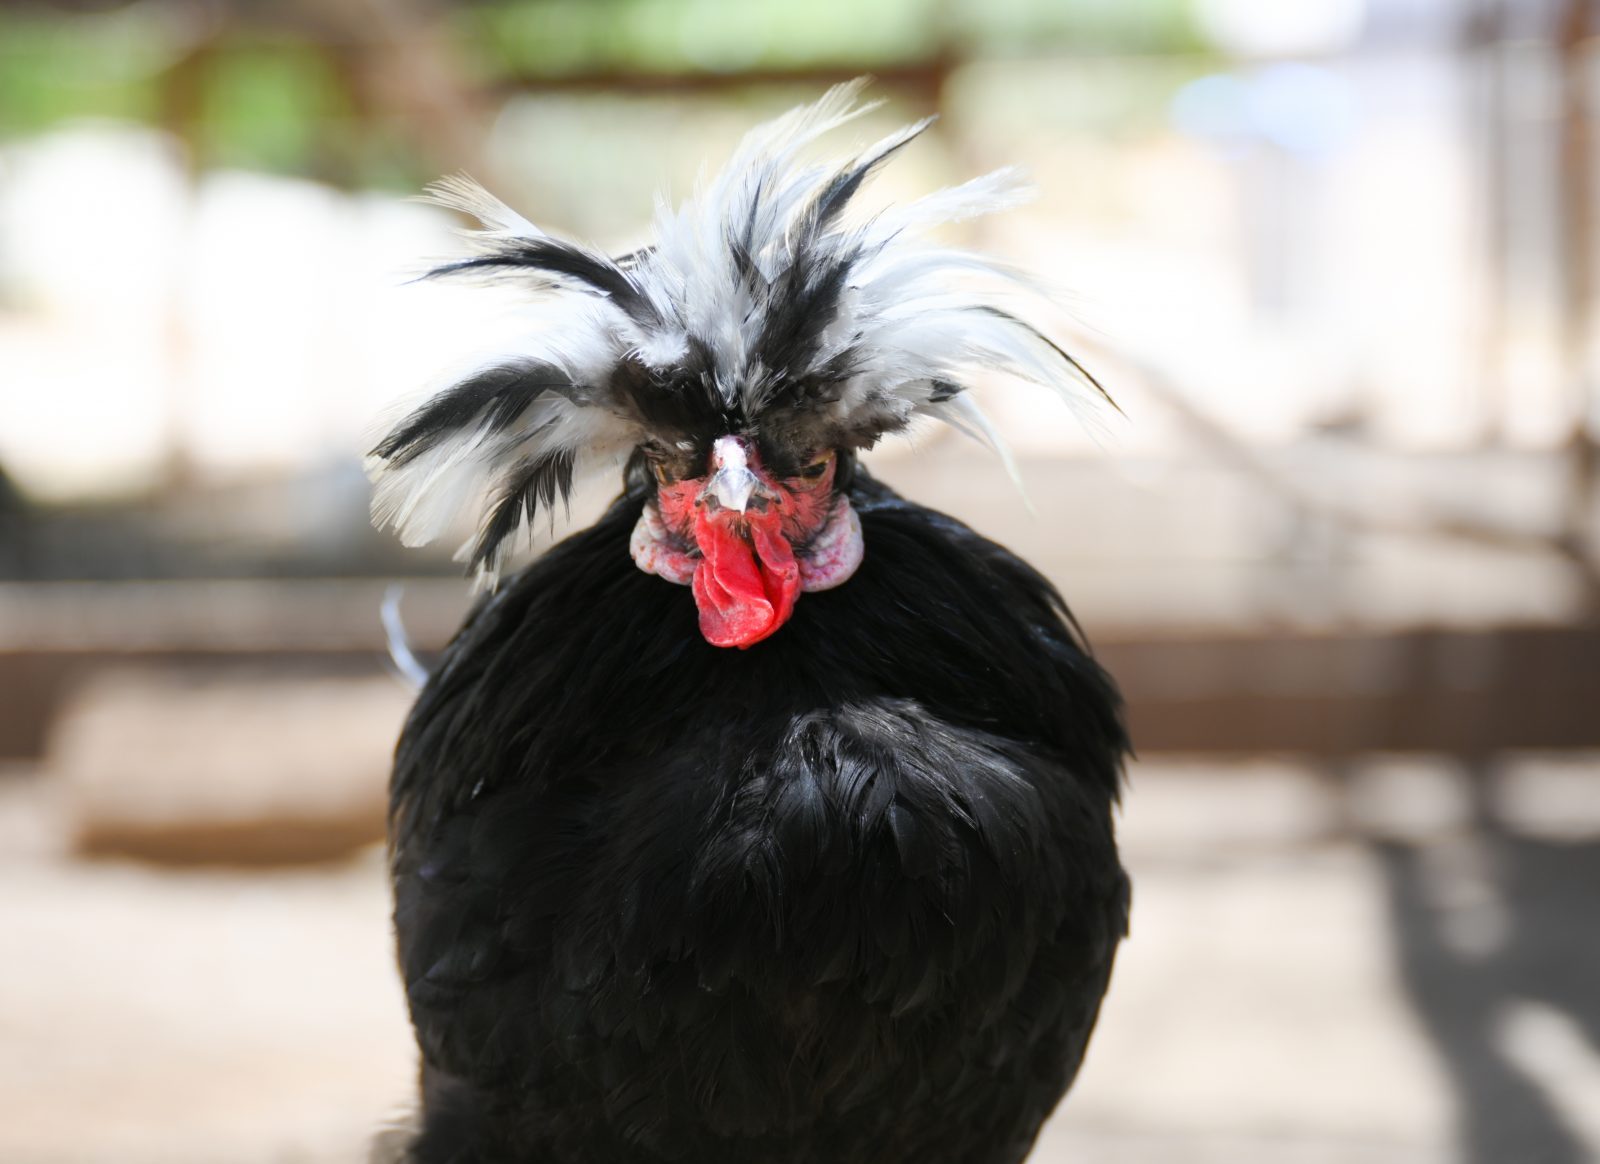 Stephen Rooster at Farm Sanctuary's Southern California shelter